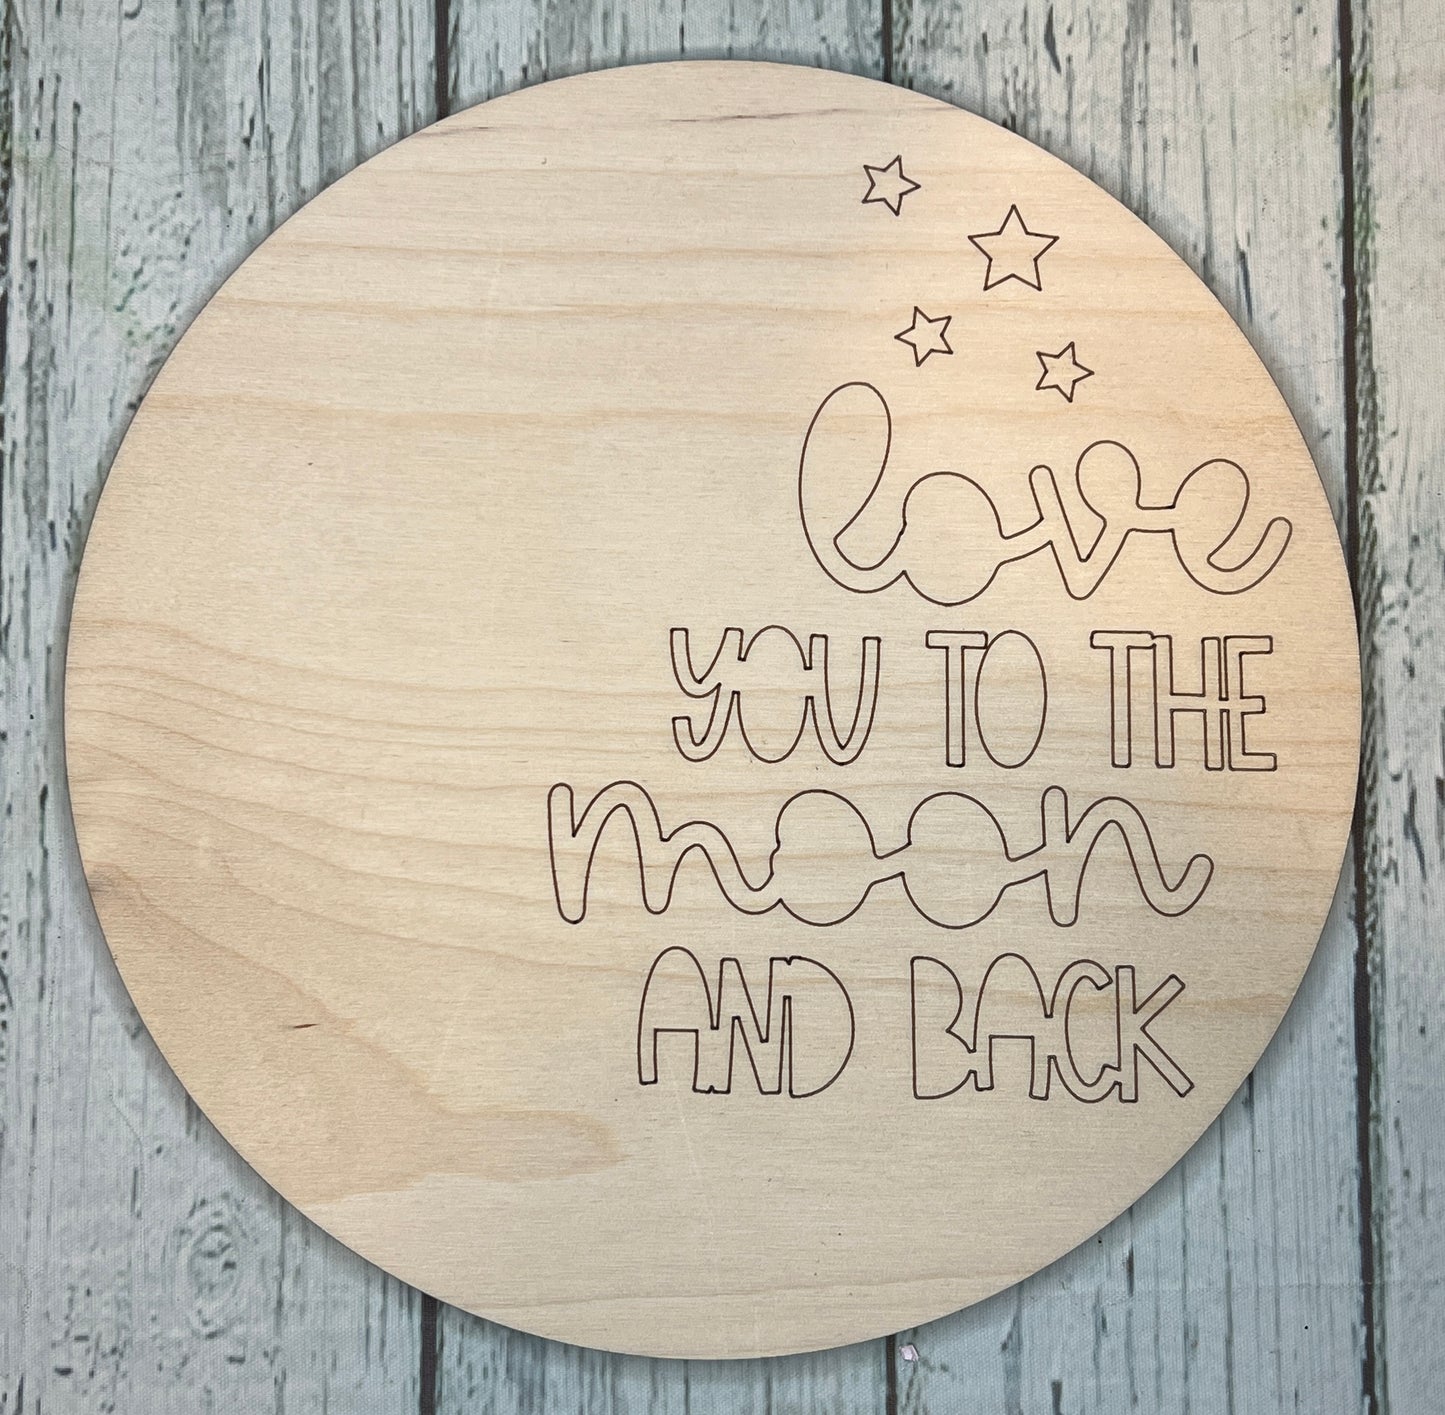 Love You to the Moon and back - DIY Wood Blank